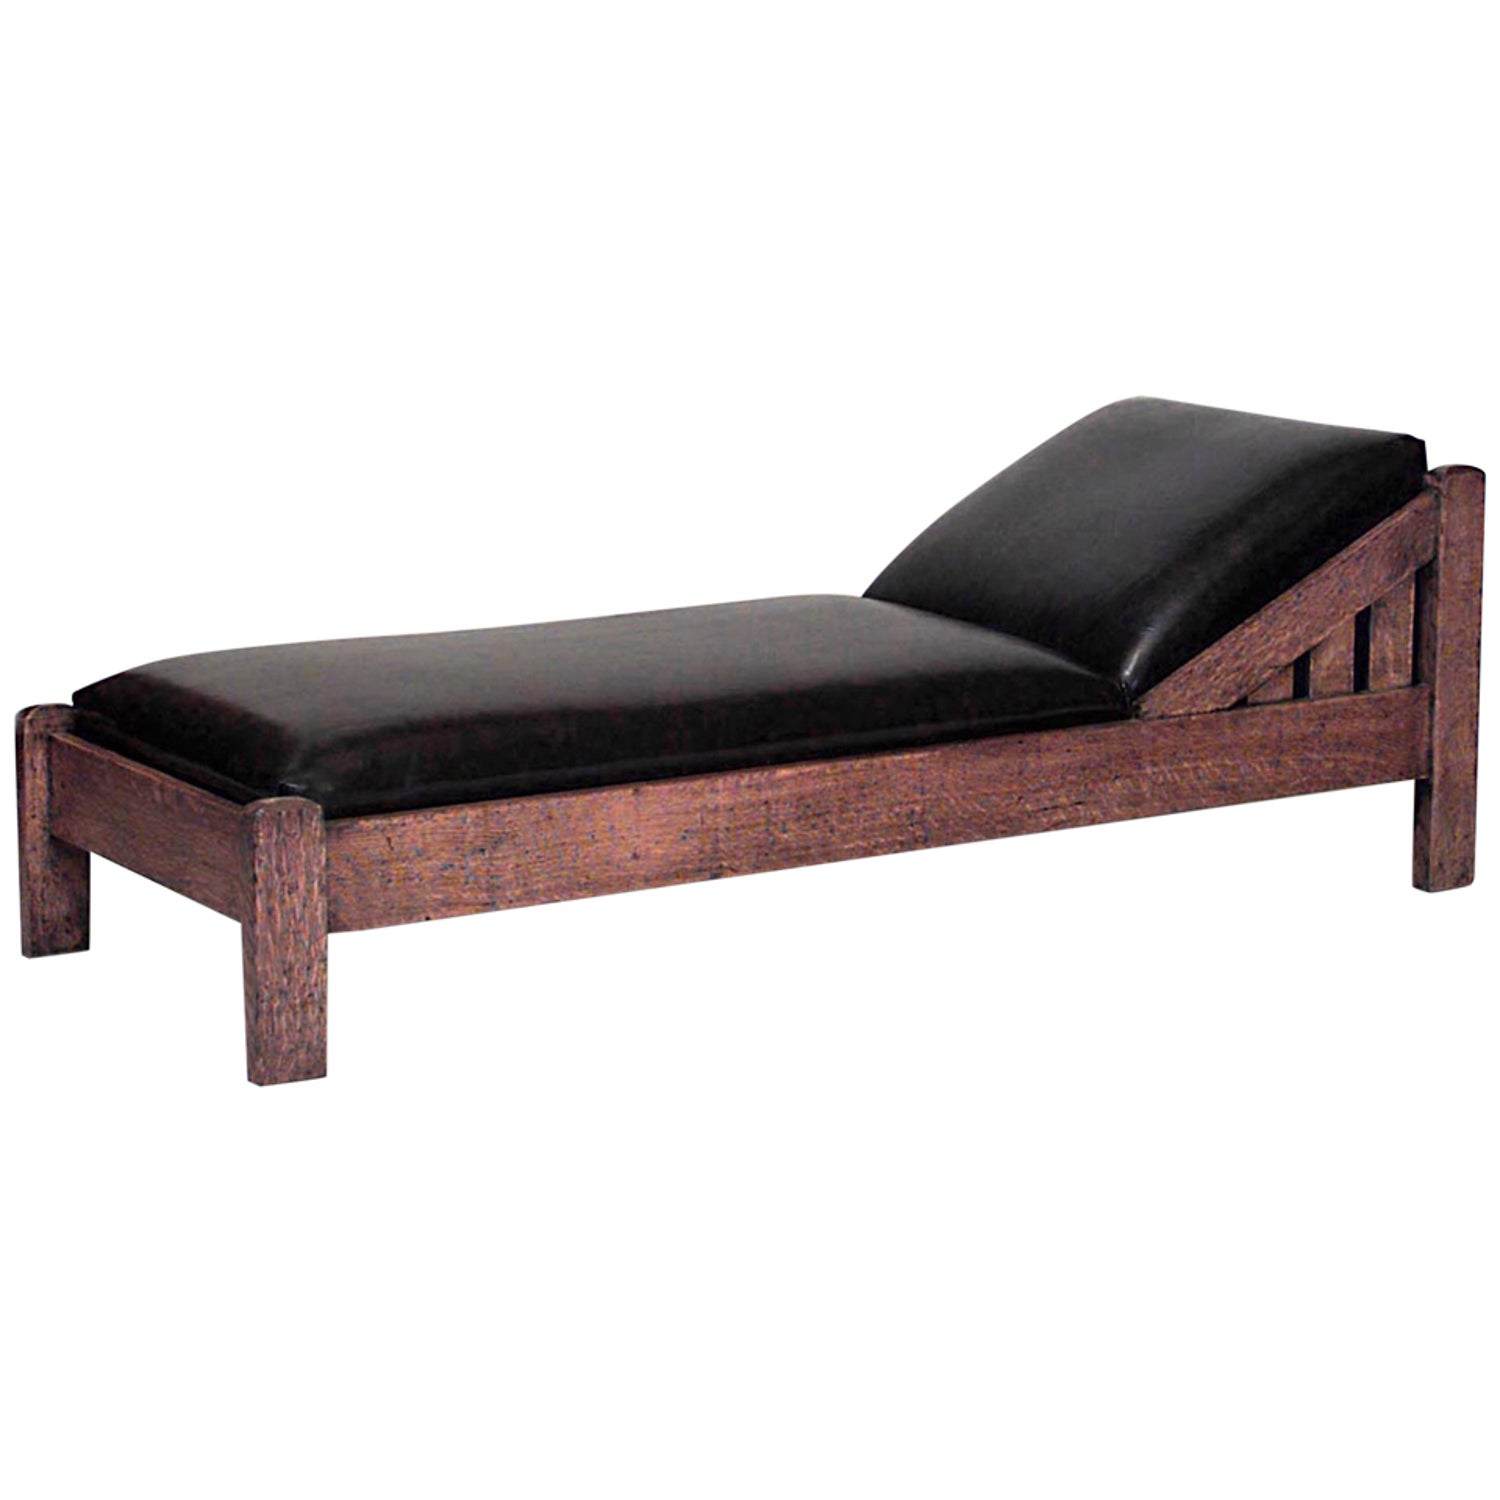 Antique Black Leather Chaise Longue - 2 For Sale on 1stDibs